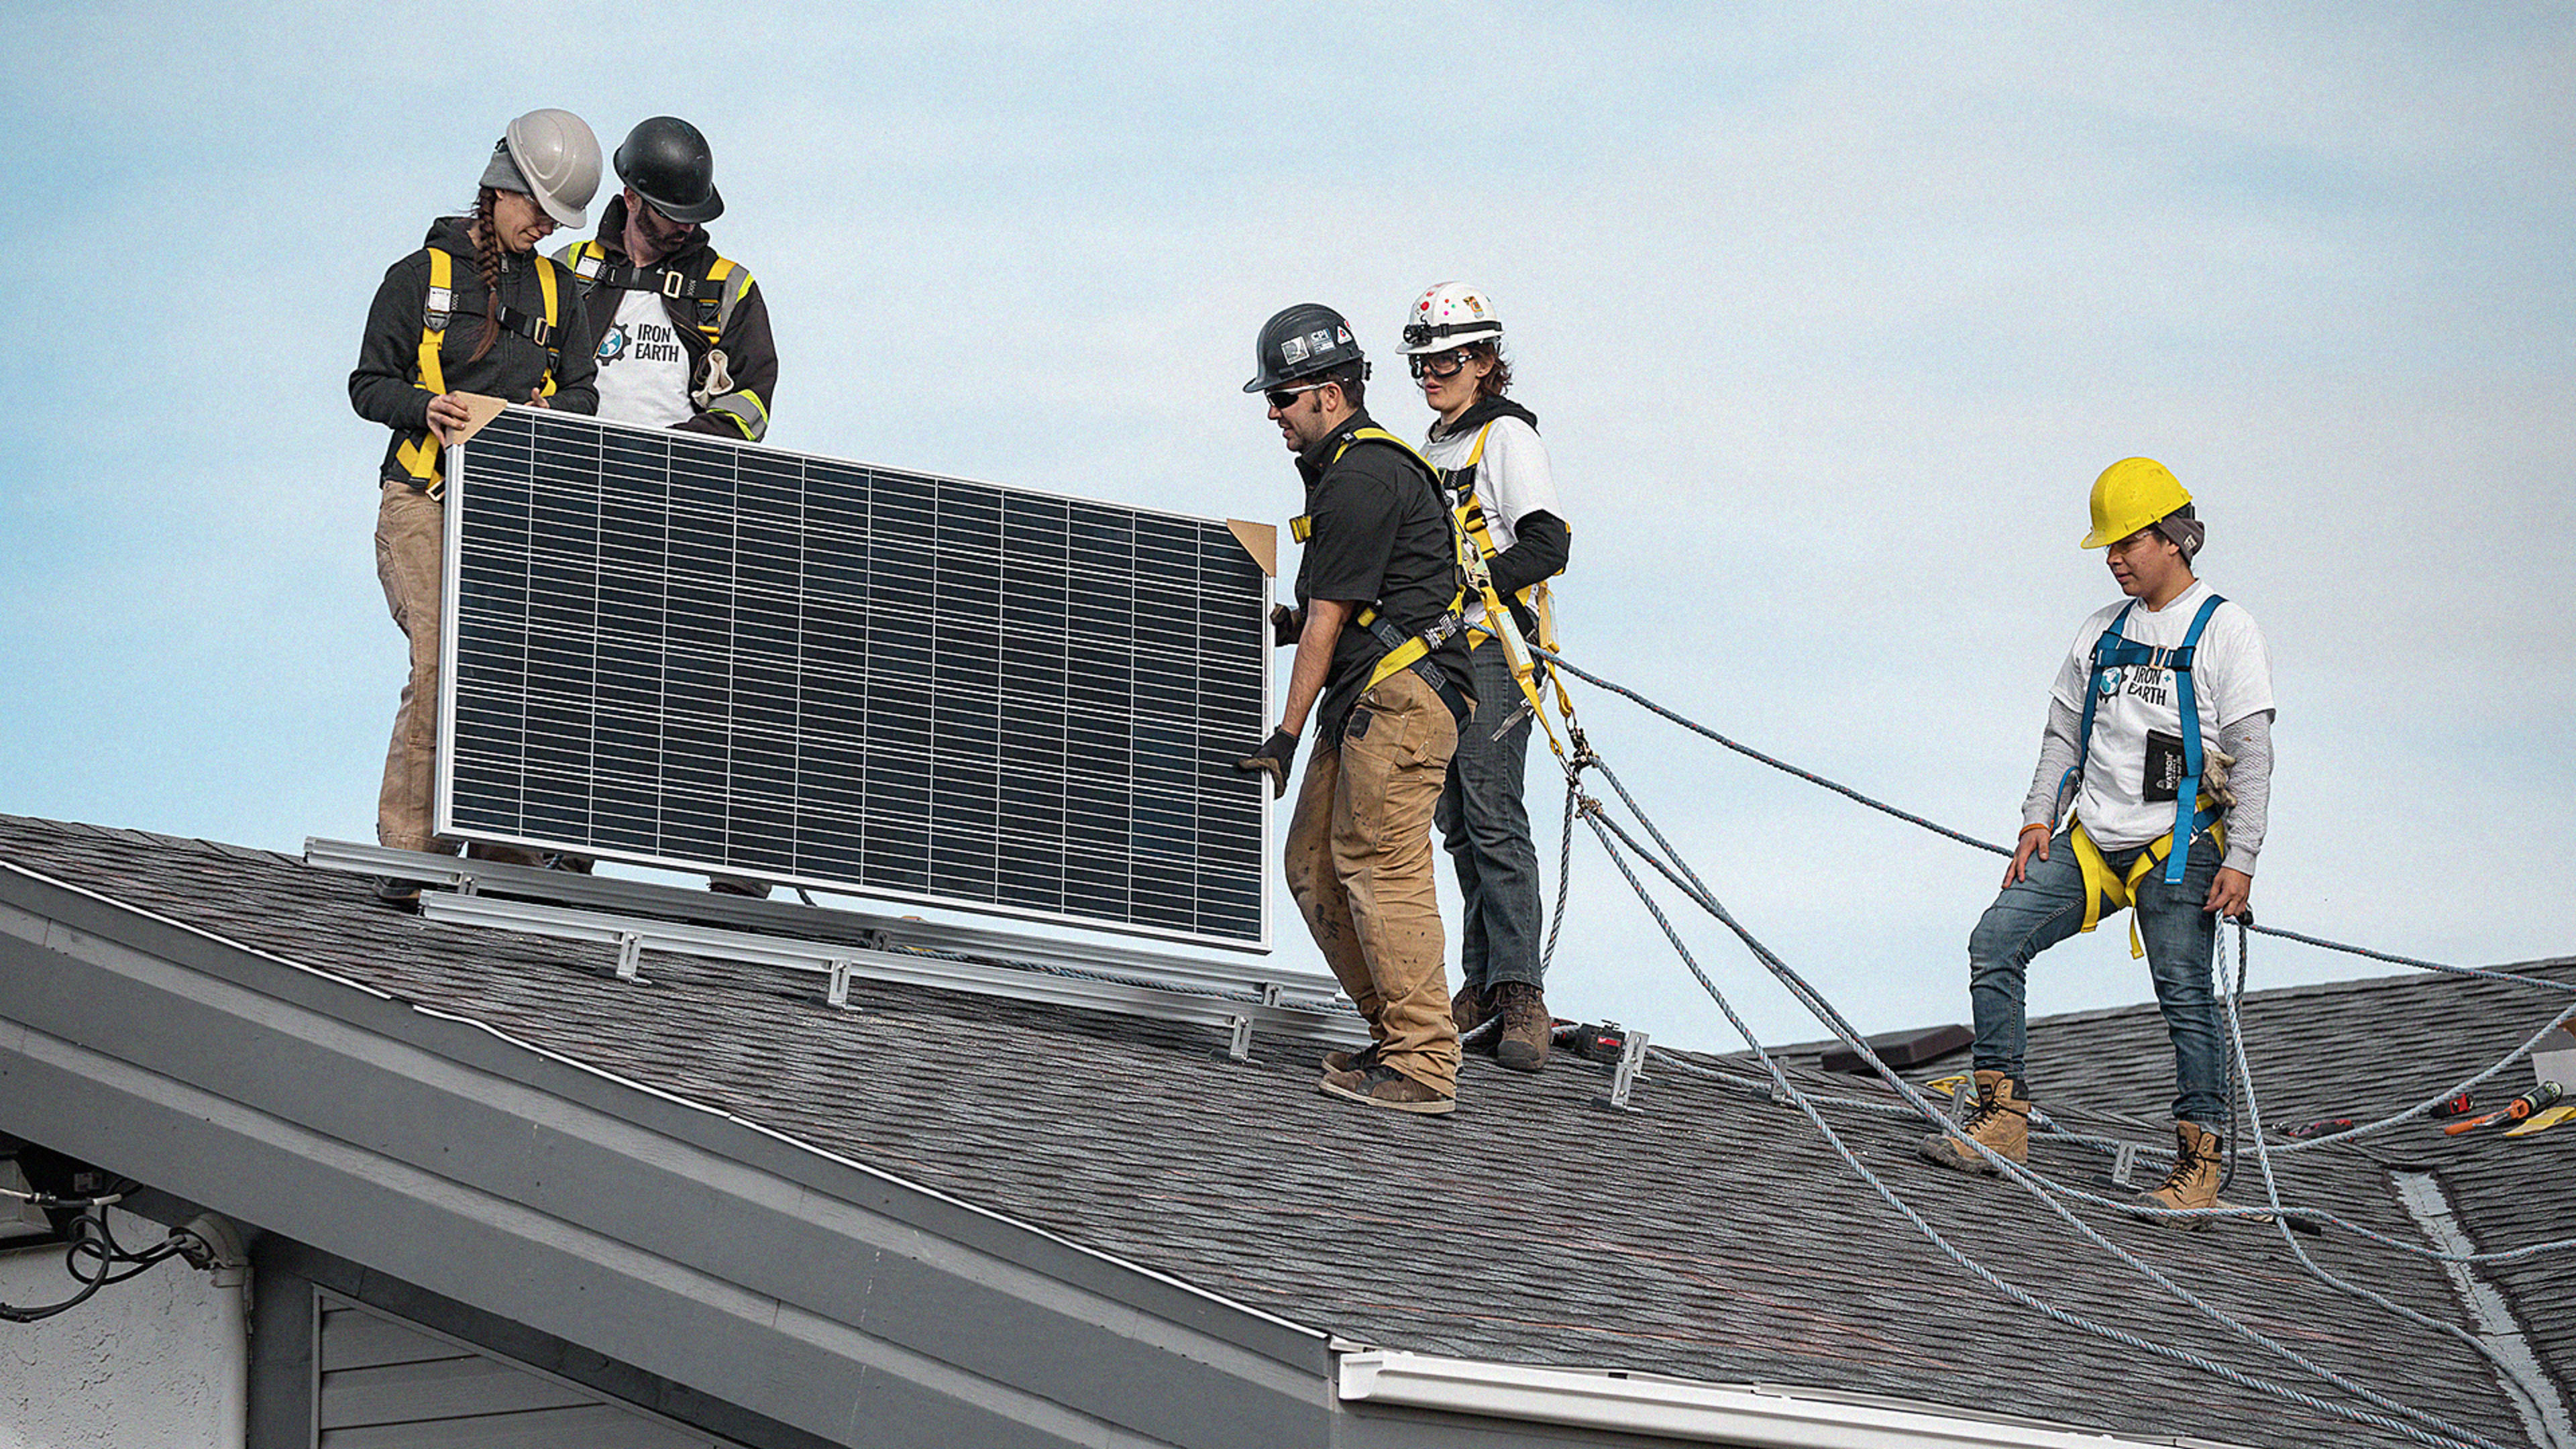 These Oil Industry Workers Now Teach Their Colleagues How To Install Solar